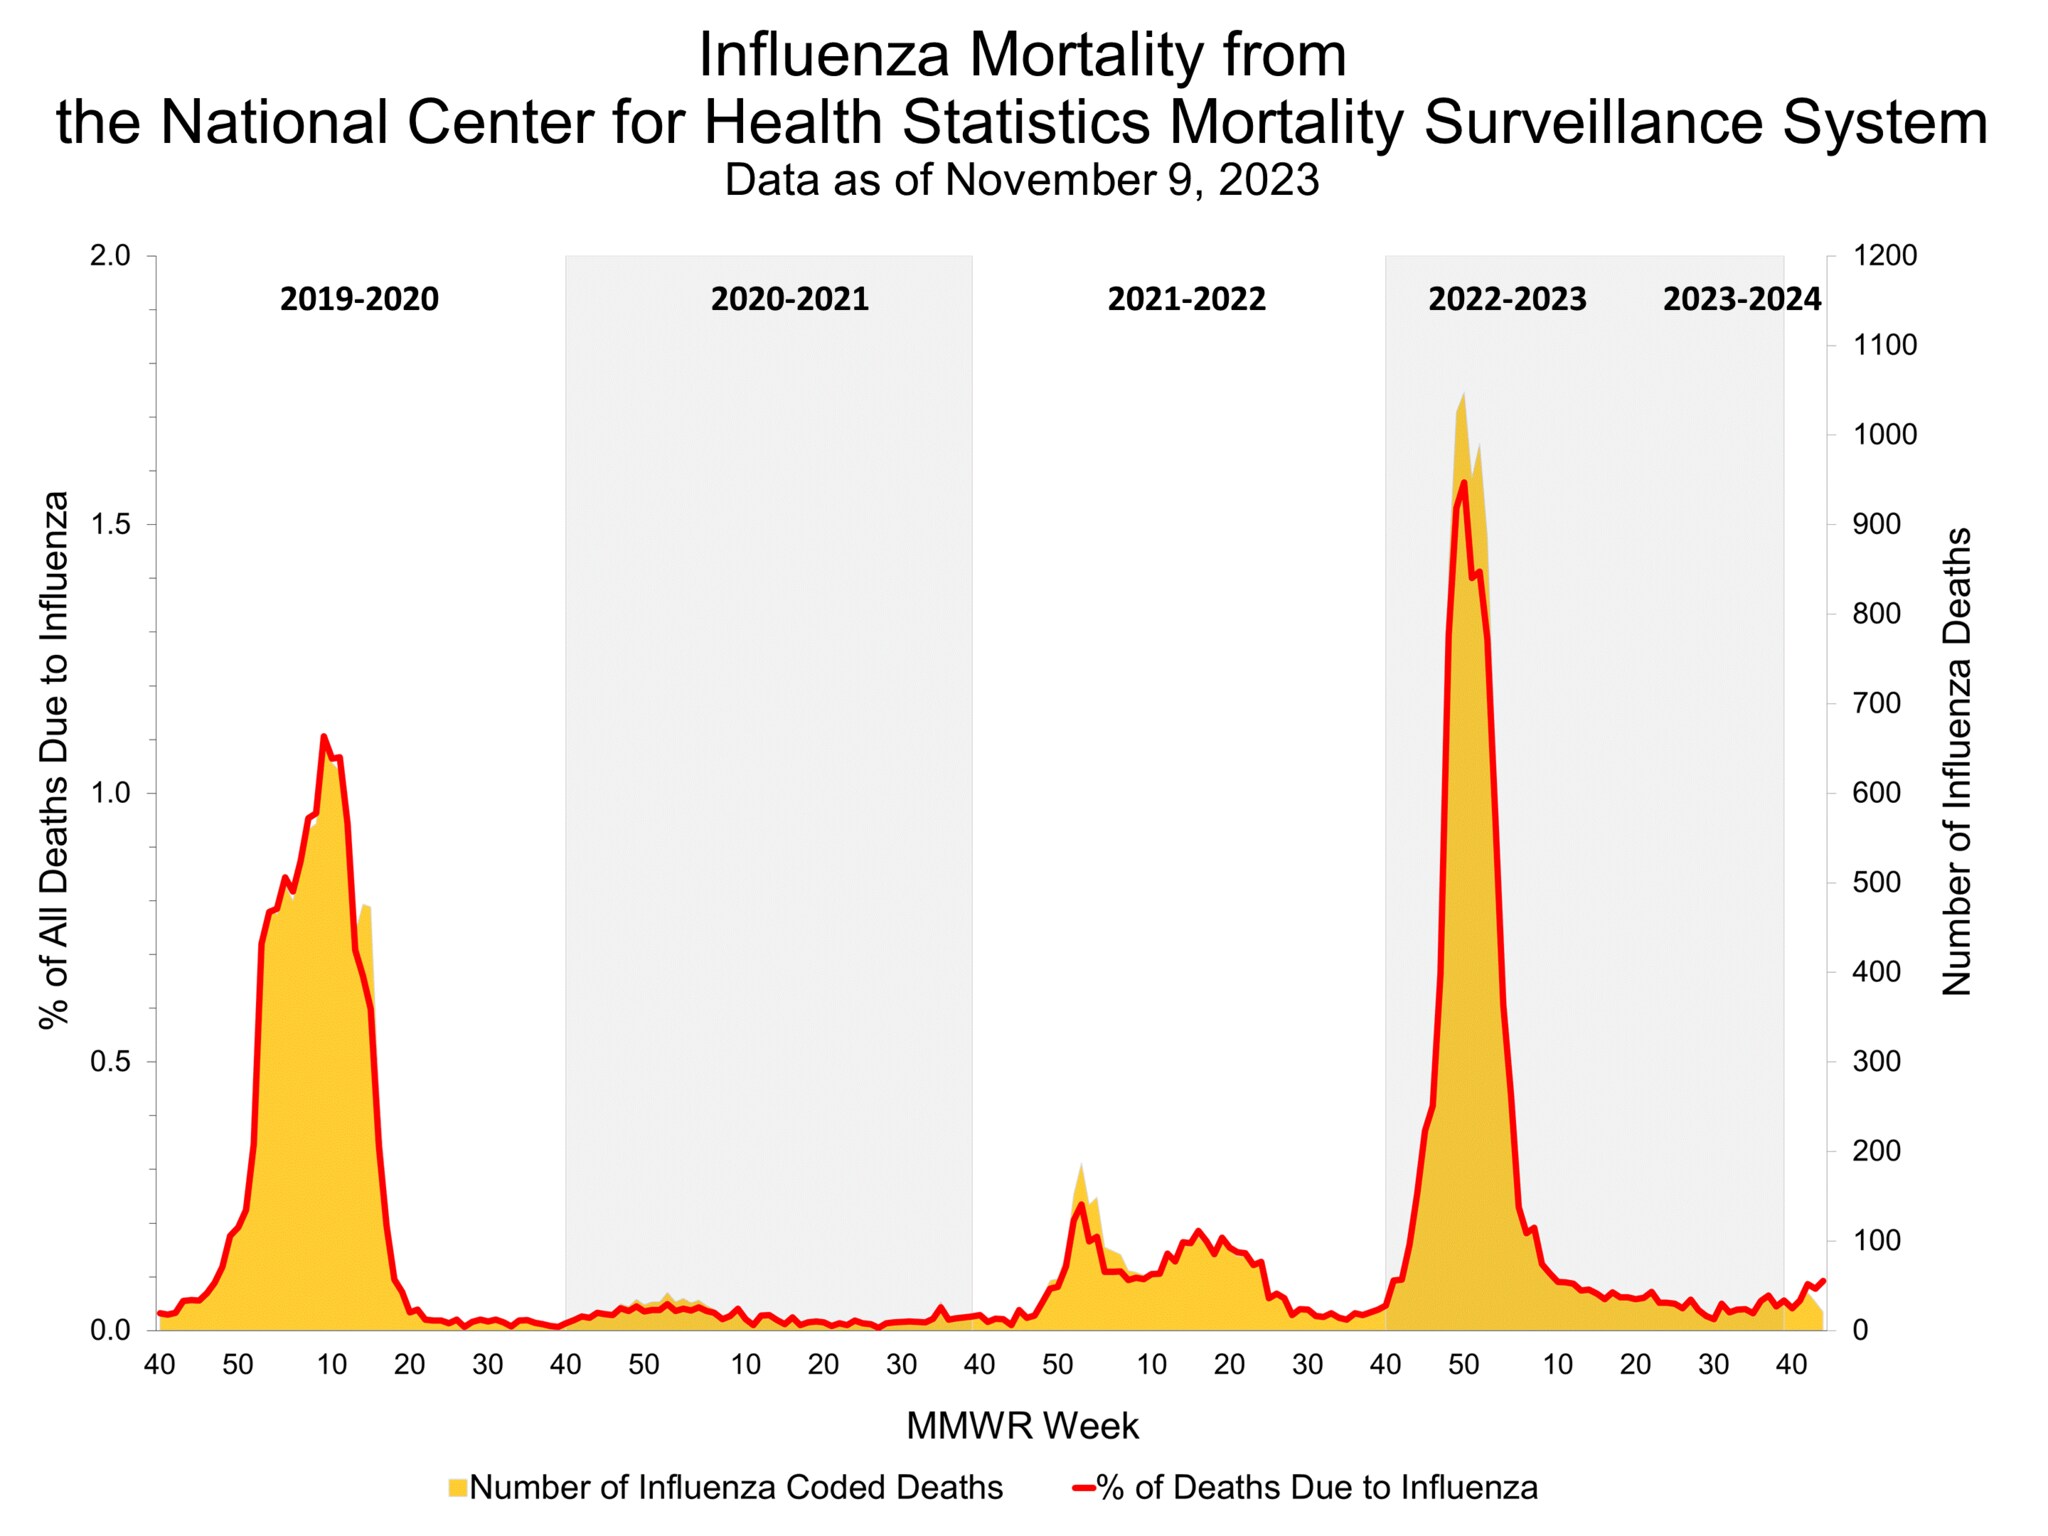 Pneumonia and Influenza Mortality for NCHS Mortality Surveillance